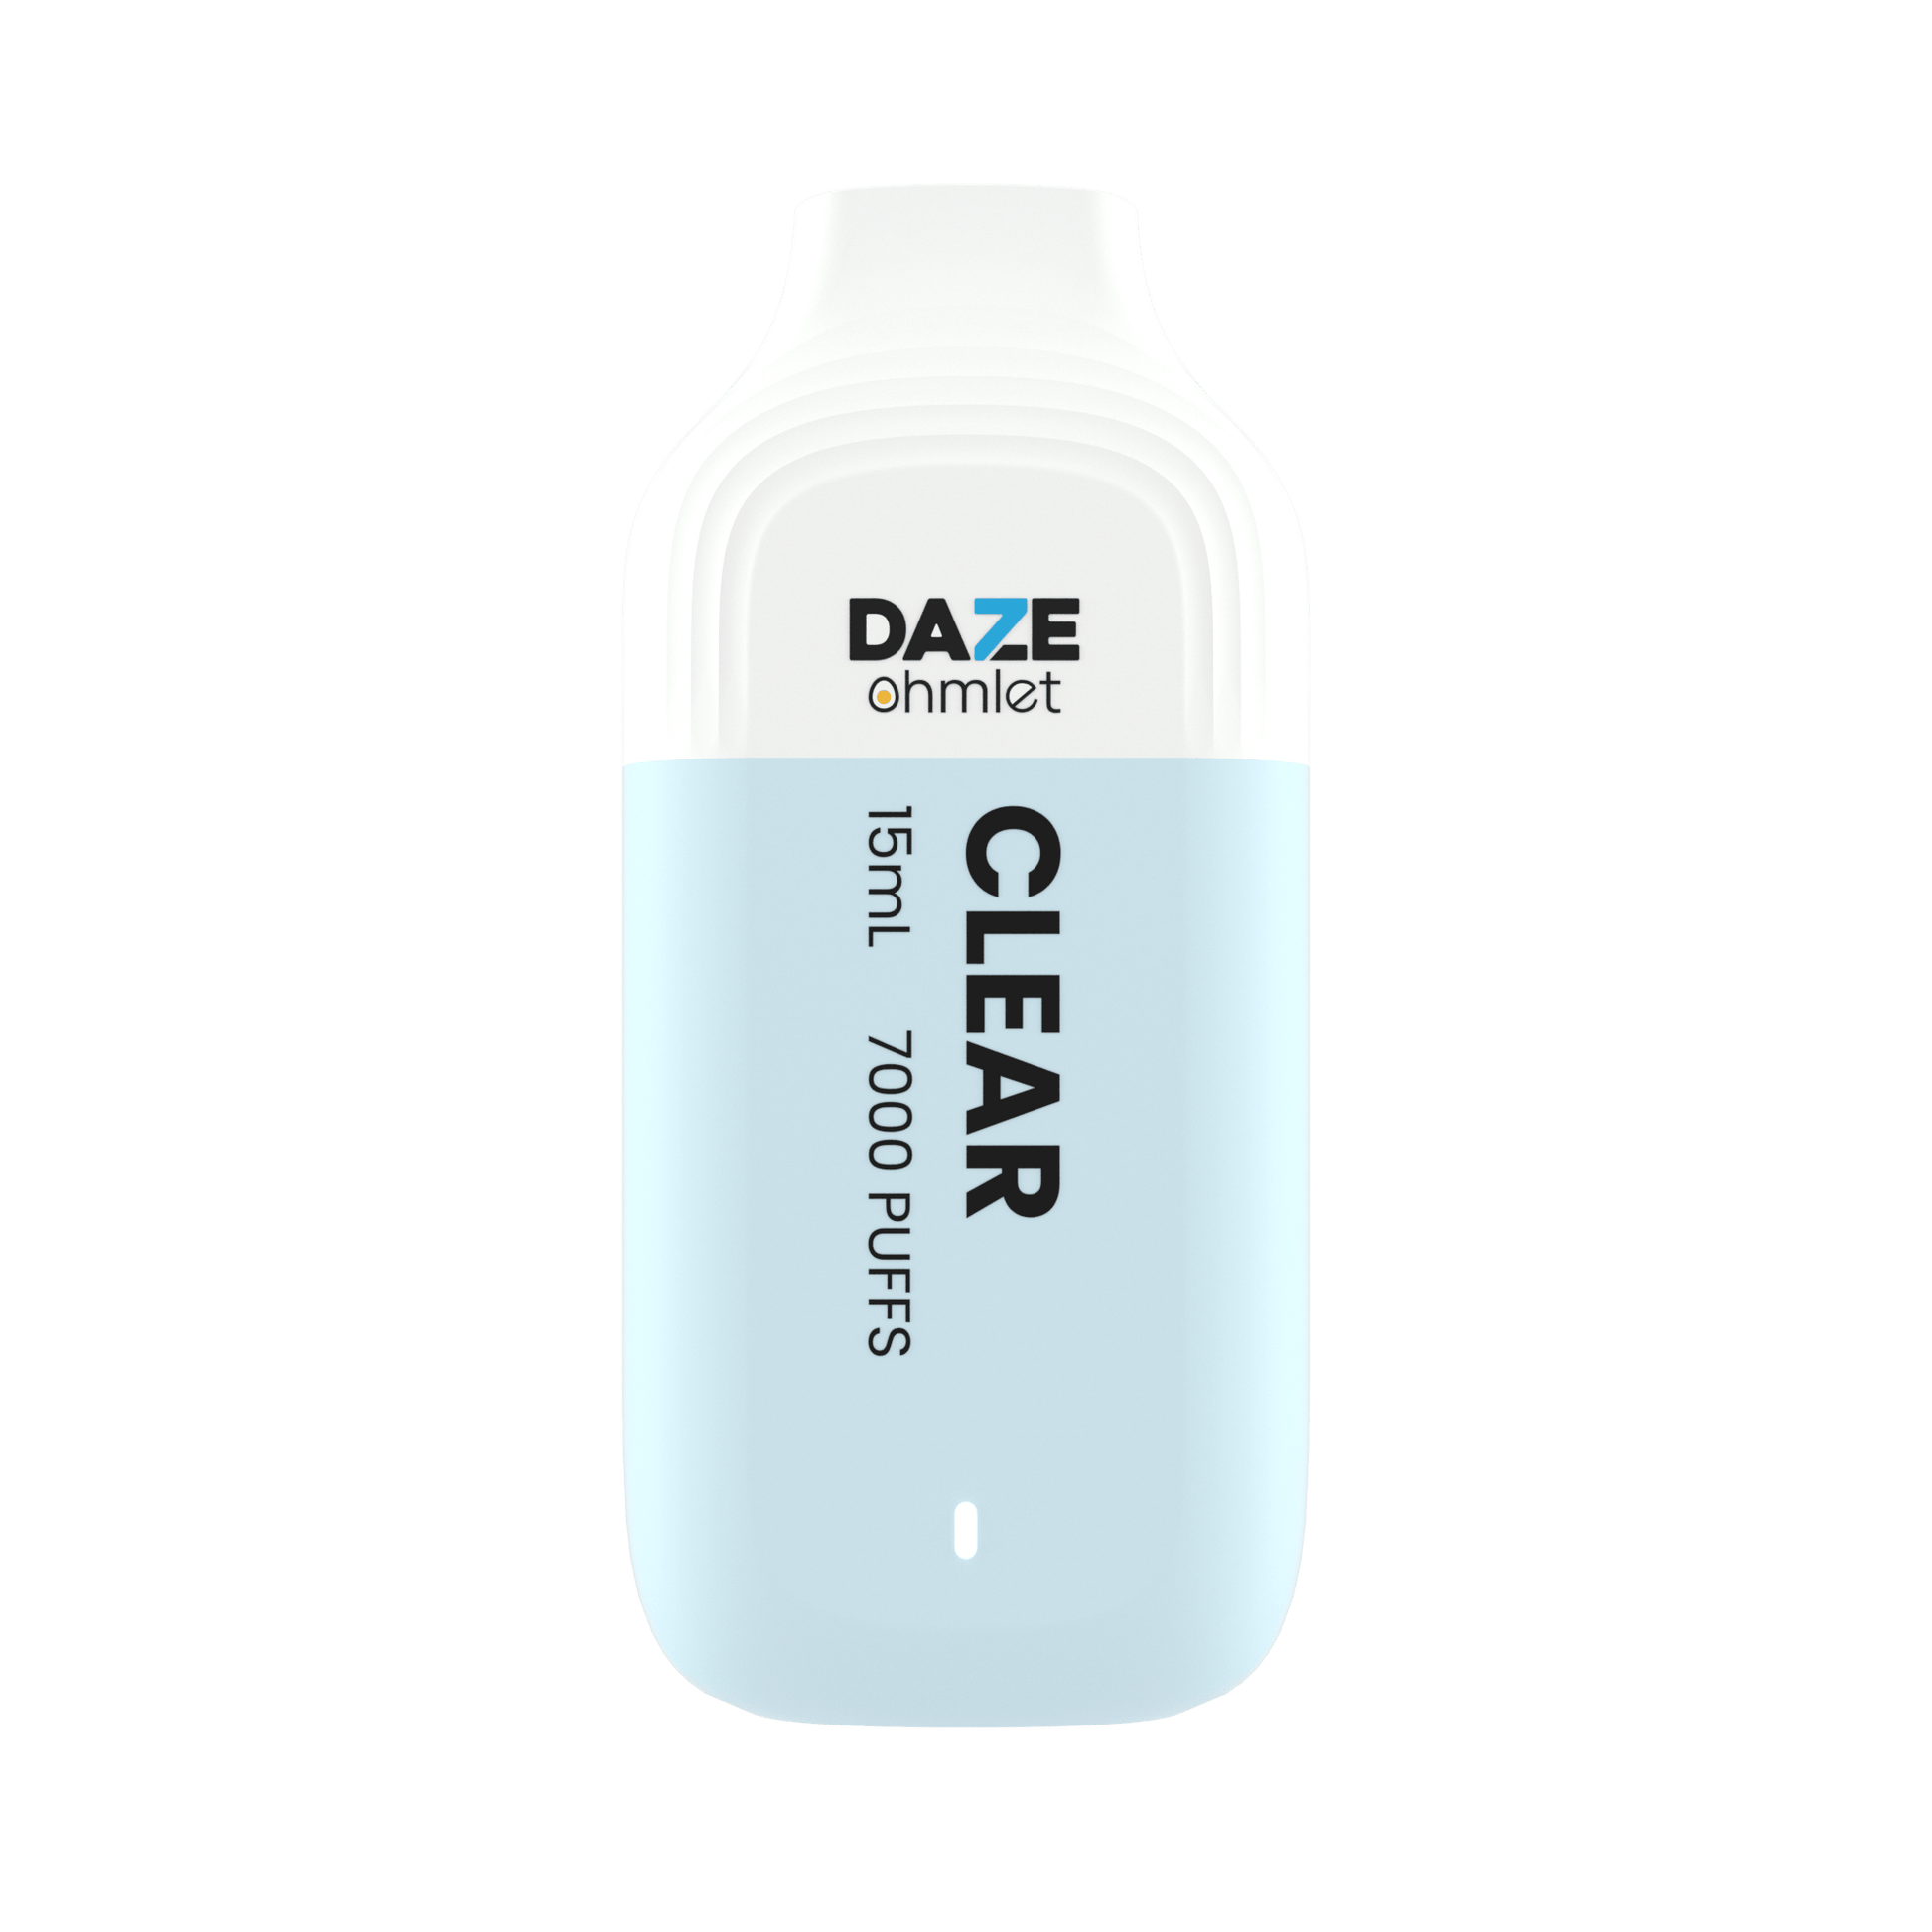 Daze OHMLET Disposable | 7000 Puffs | 15mL Clear